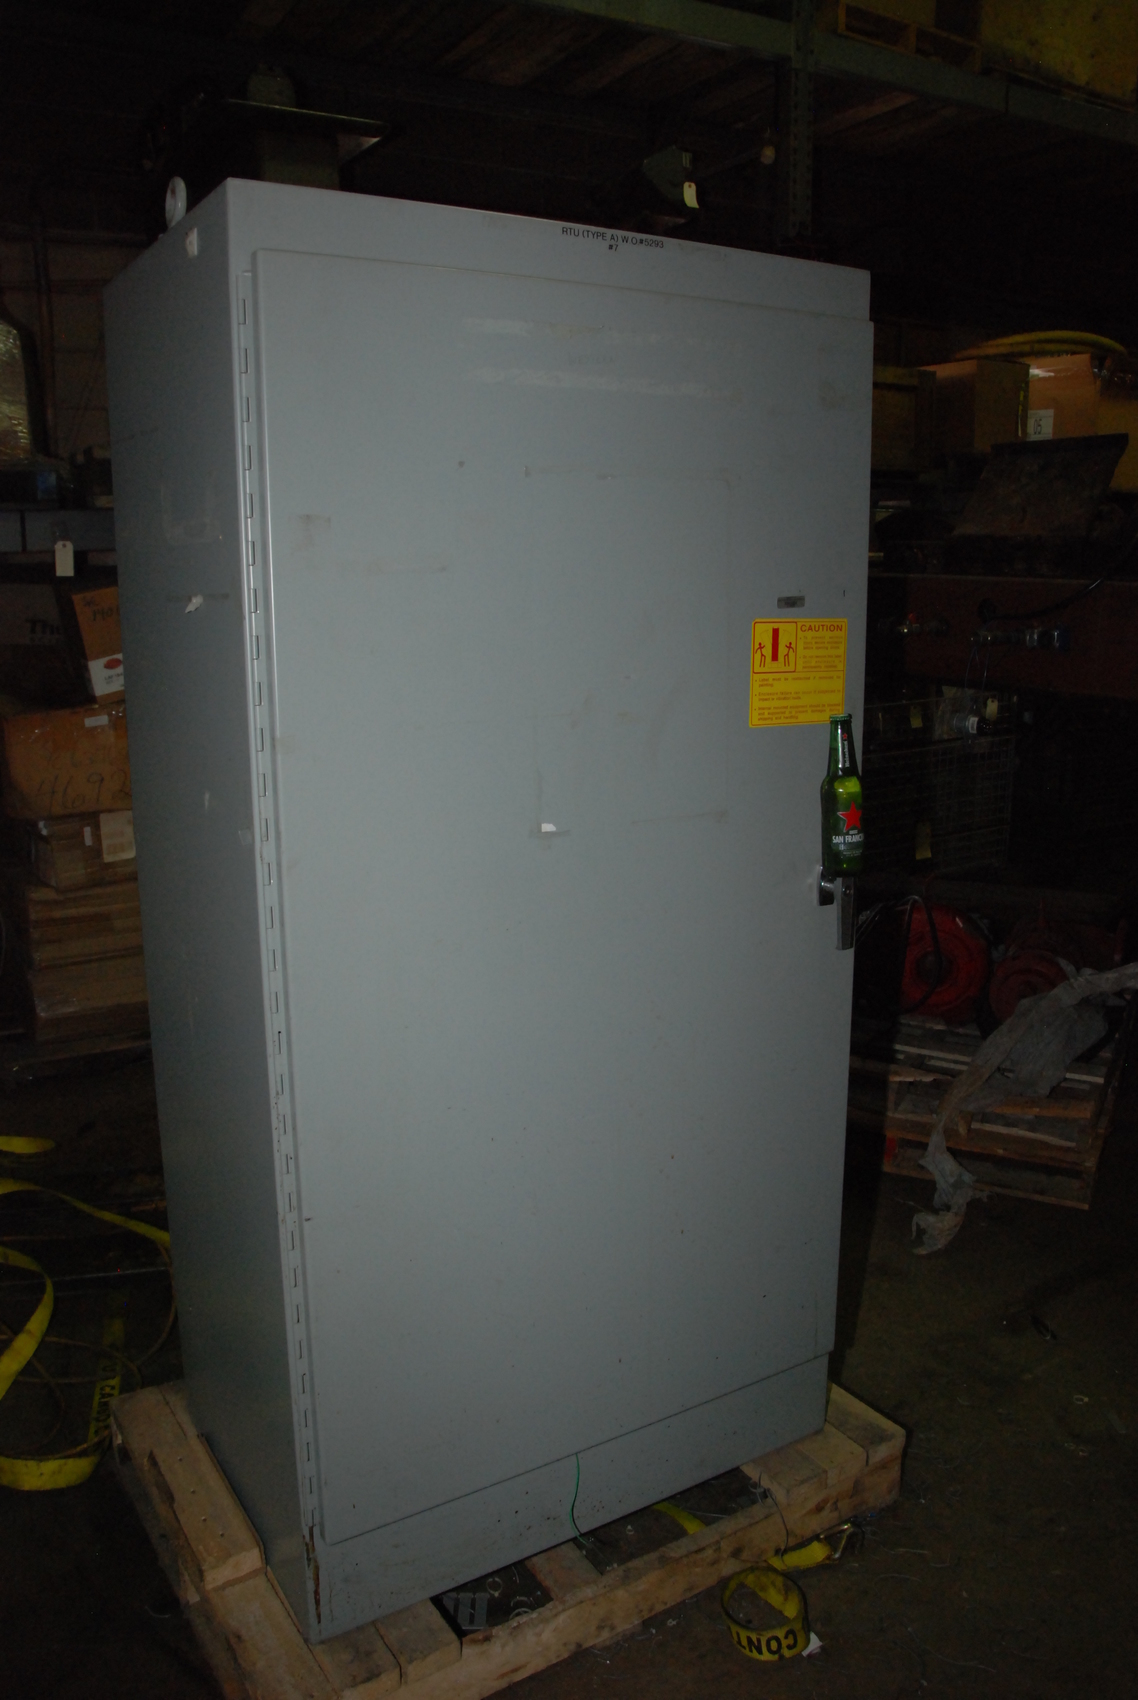 Nice heavy duty electrical cabinet enclosure;overall dimensions 36"x26